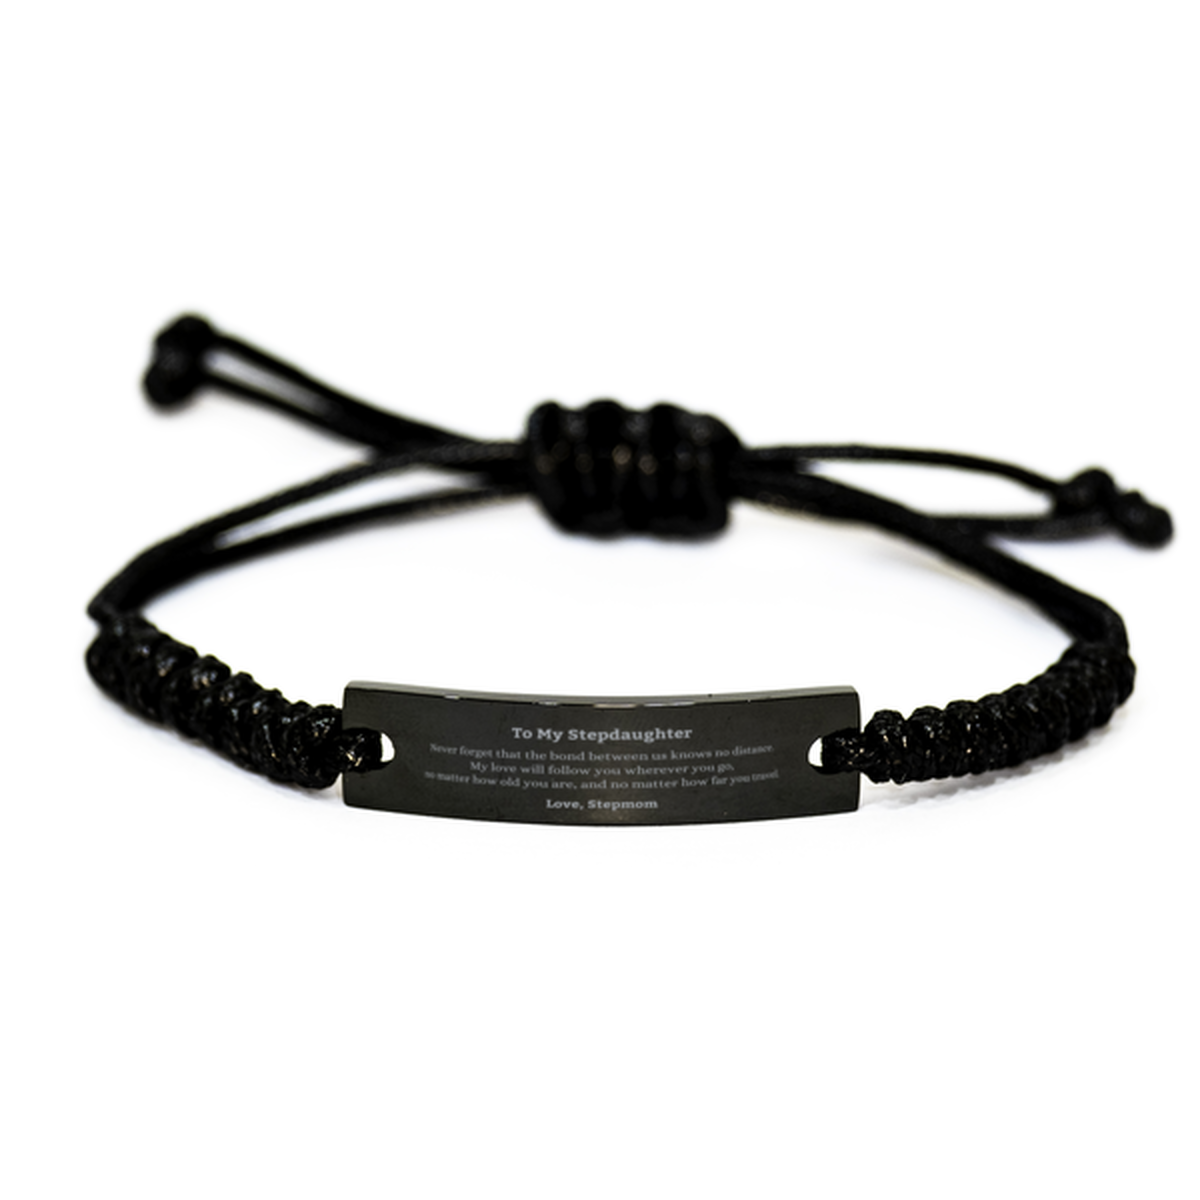 Stepdaughter Birthday Gifts from Stepmom, Adjustable Black Rope Bracelet for Stepdaughter Christmas Graduation Unique Gifts Stepdaughter Never forget that the bond between us knows no distance. Love, Stepmom